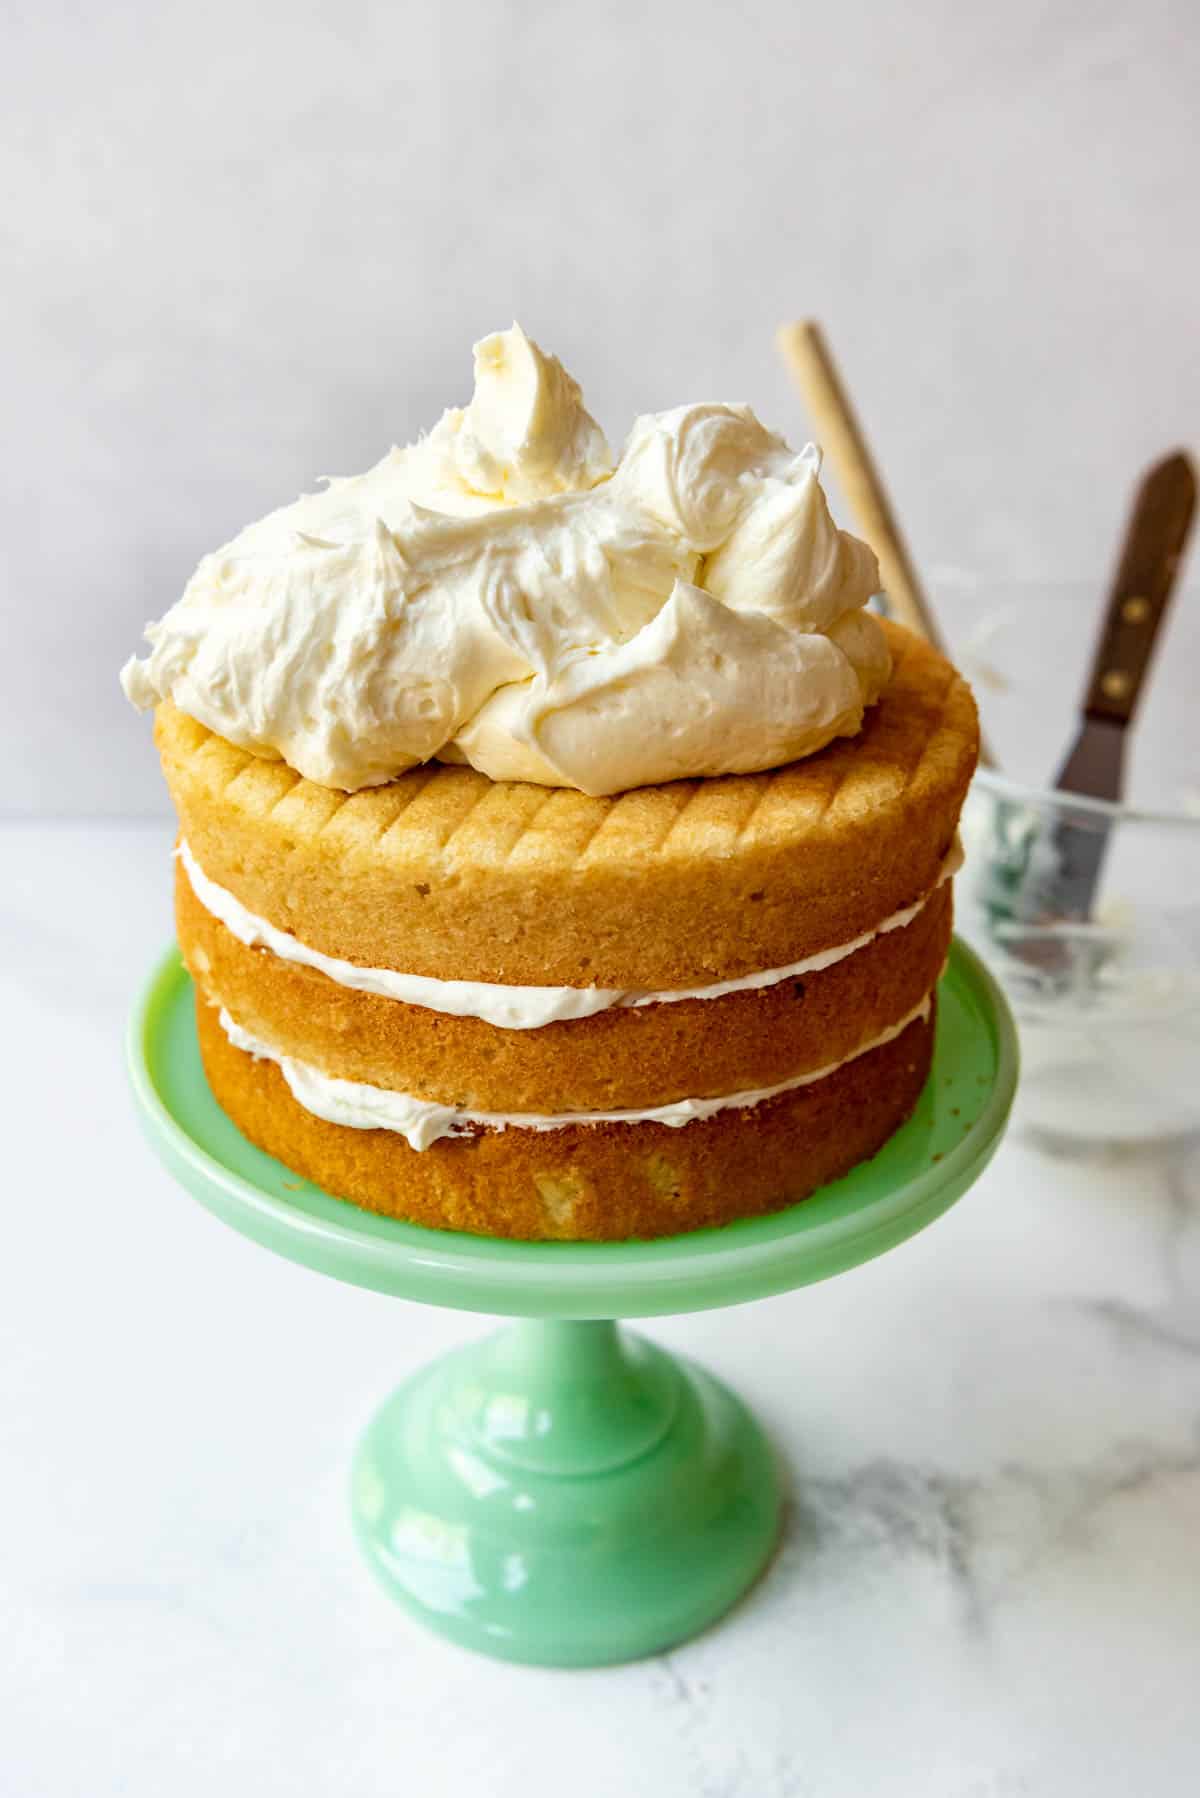 A green cake stand with a three-tiered coconut cake on top, with frosting between each layer and a heaped pile of frosting on top, ready to be smoothed out.